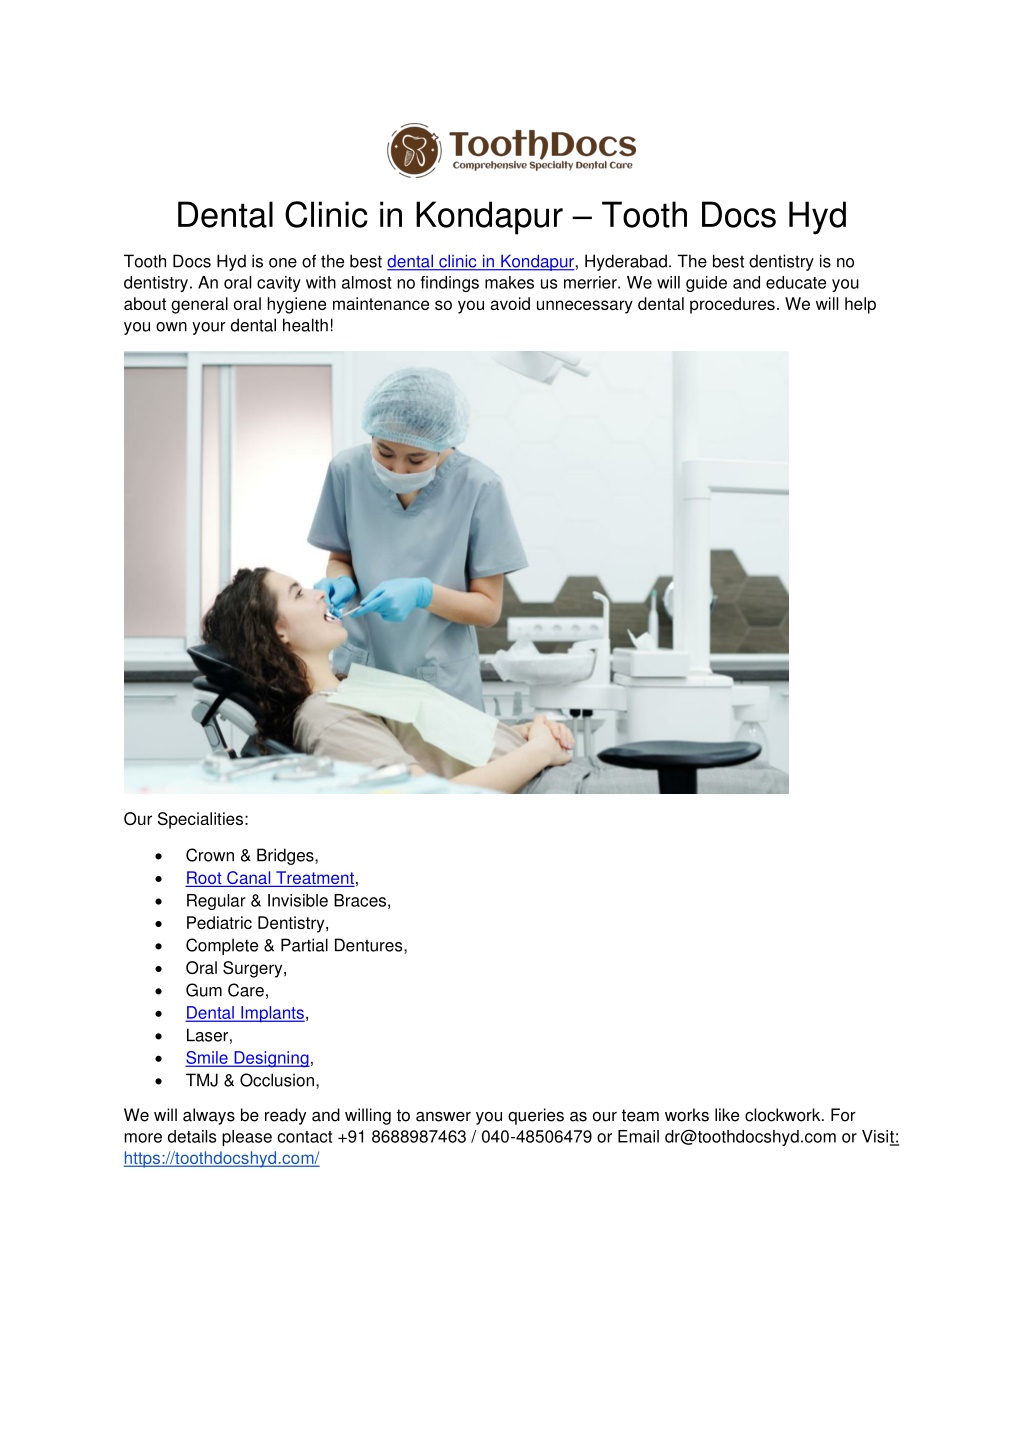 PPT - Dental Clinic in Kondapur - Tooth Docs Hyd PowerPoint Presentation -  ID:11091485